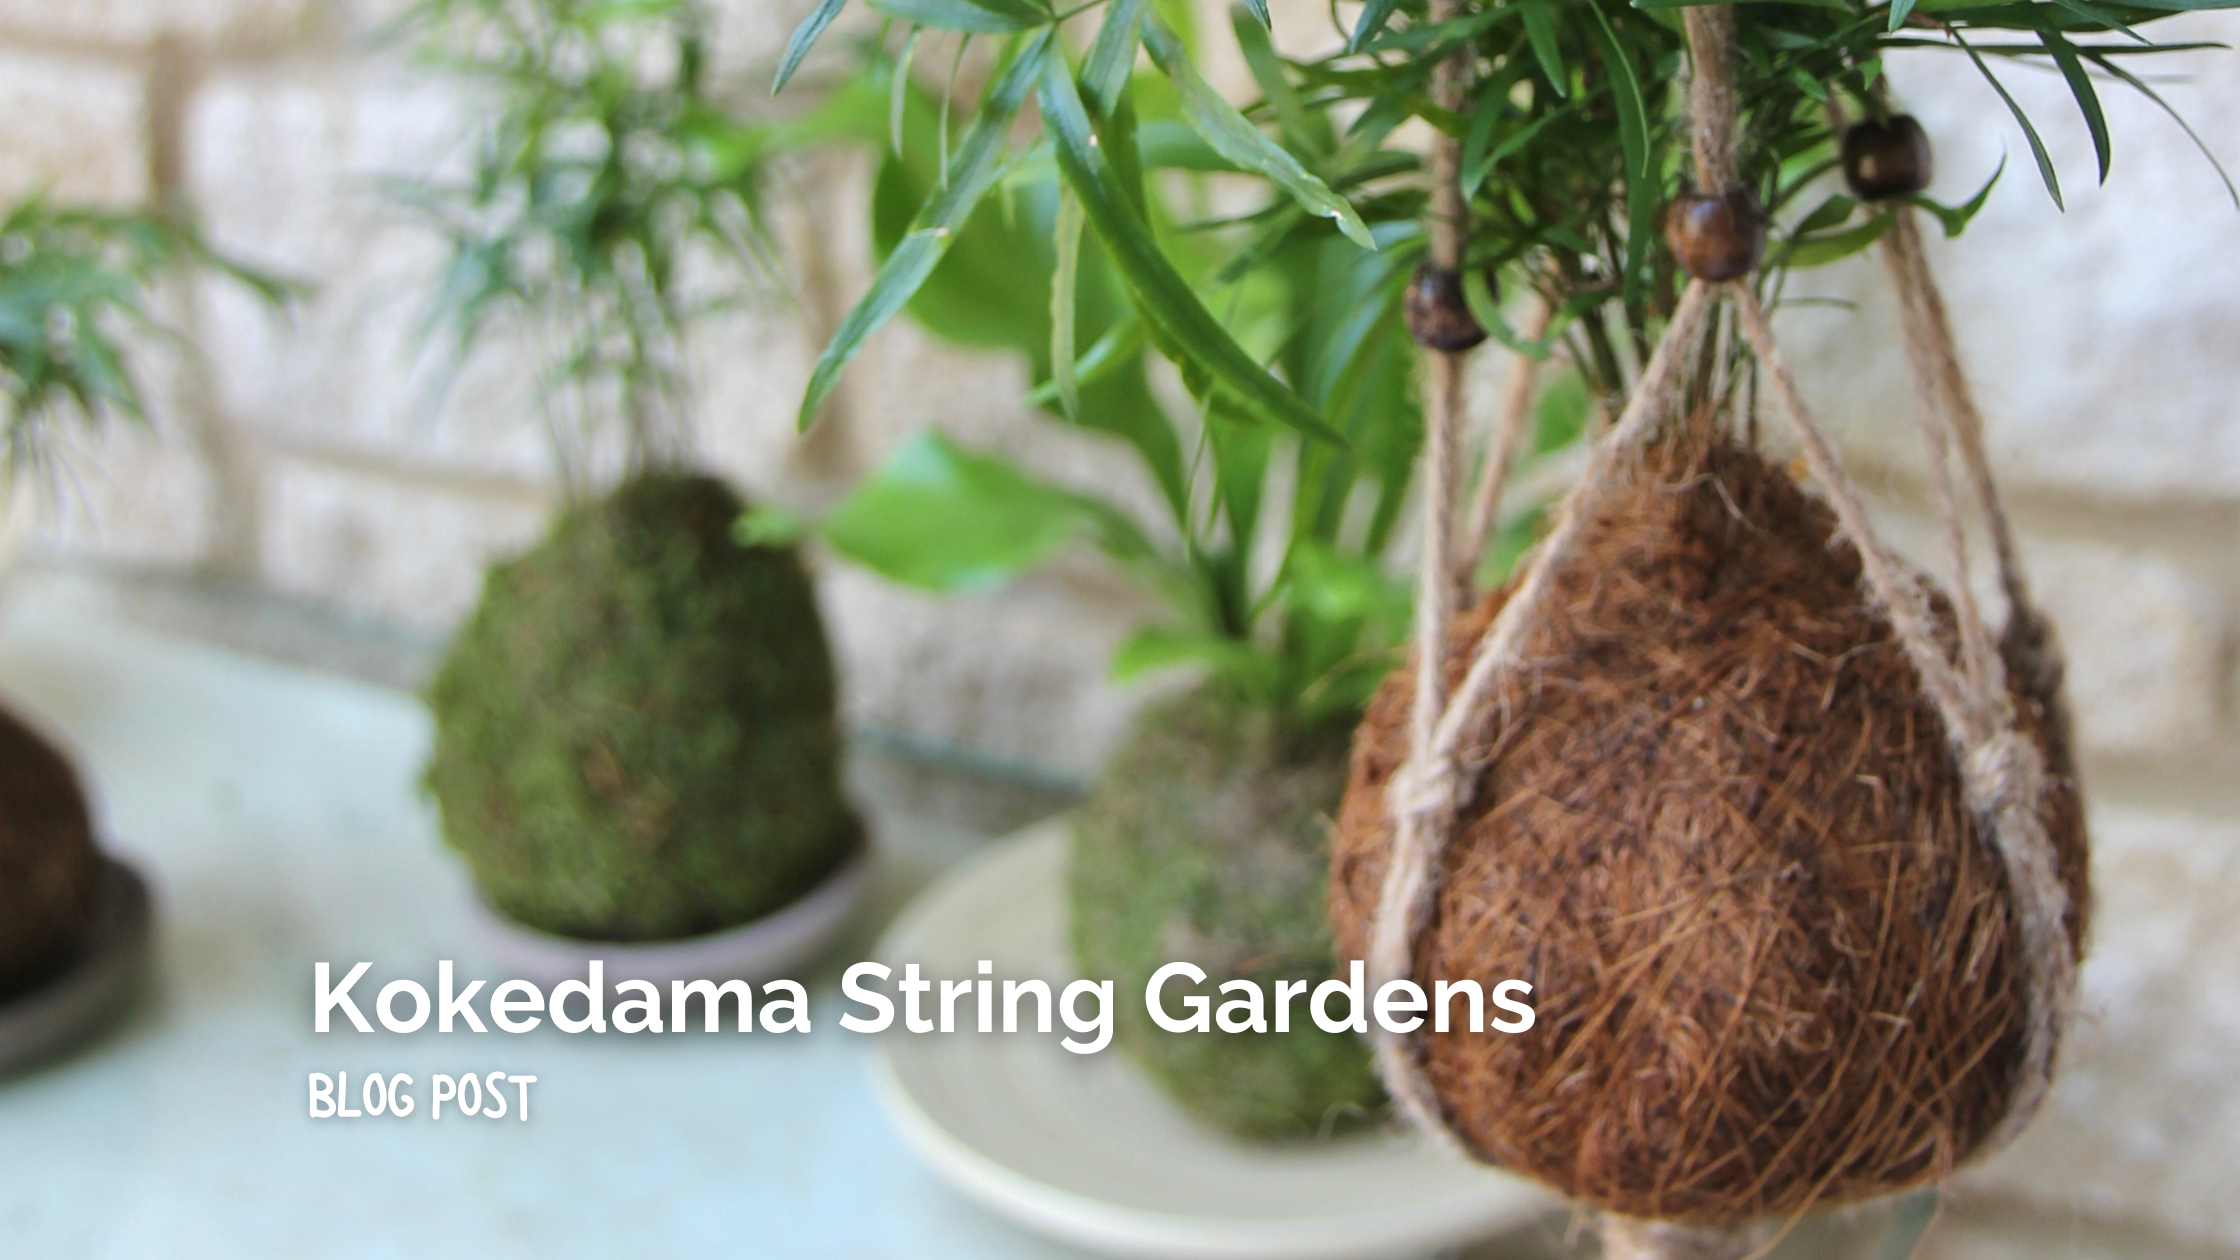 Kokedama String Gardens: Creative Ways to Decorate with Hanging Plants